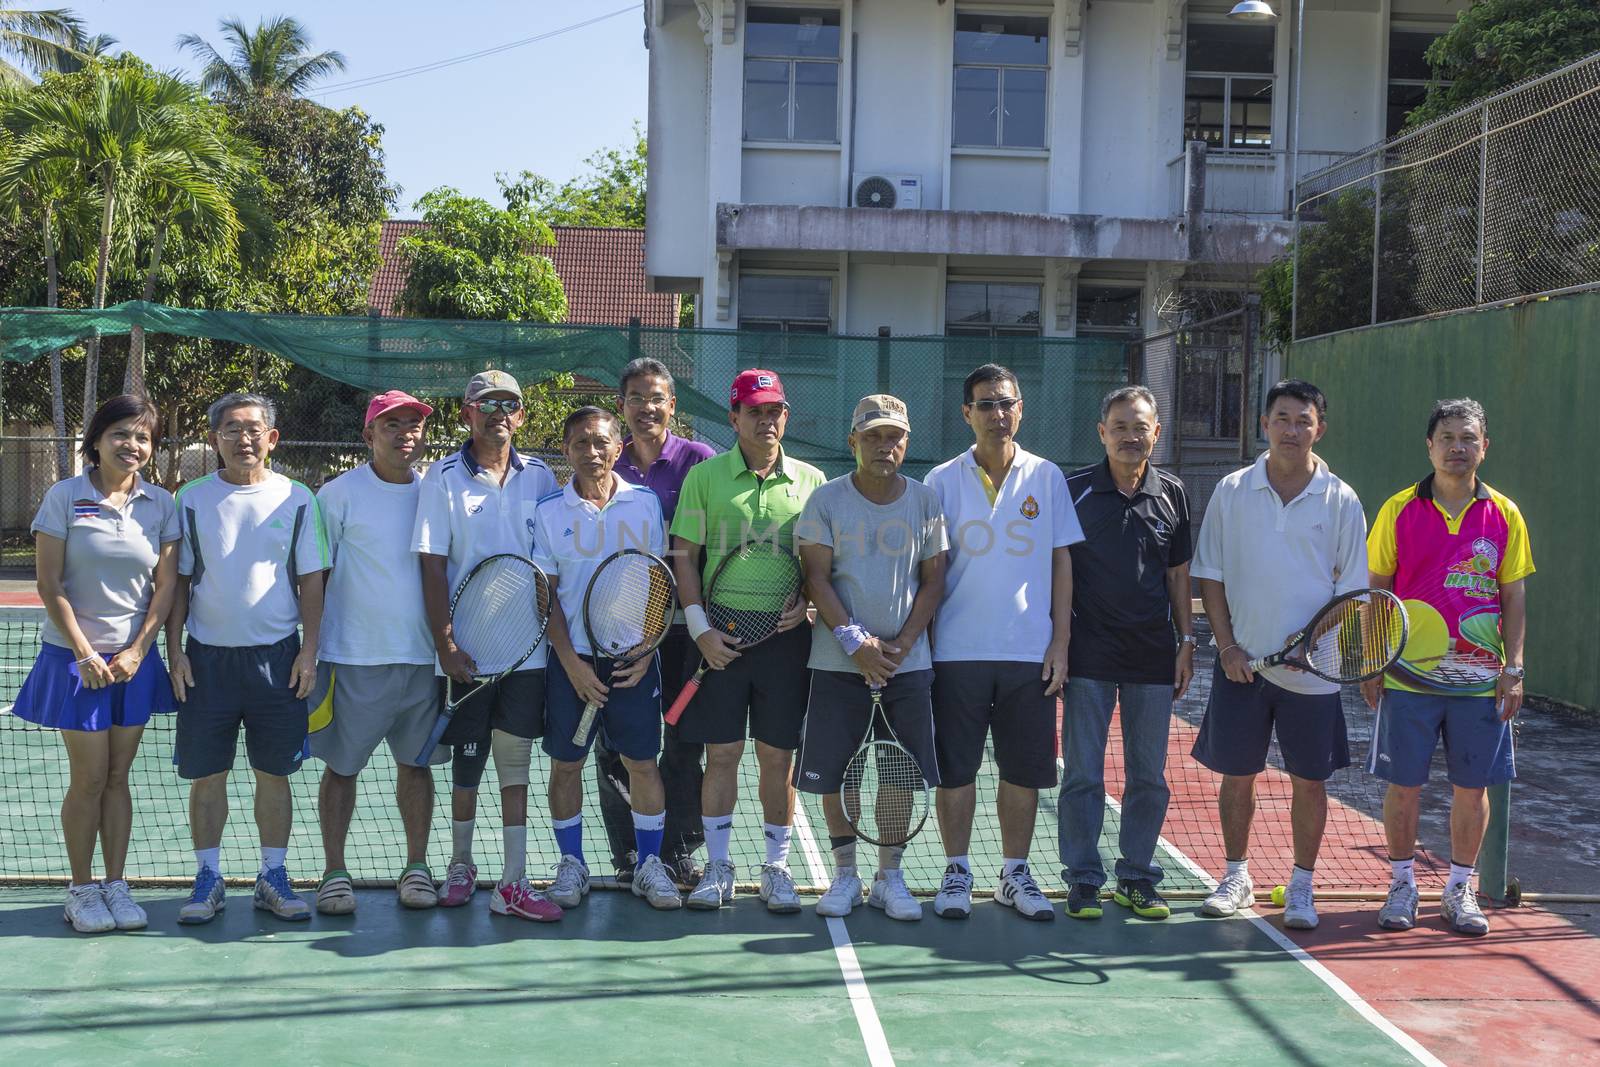 SURAT THANI, THAILAND - MARCH 1: Group of Thai tennis players holding rackets at Chaiya tennis court on March 1, 2014 in Surat Thani, Thailand.